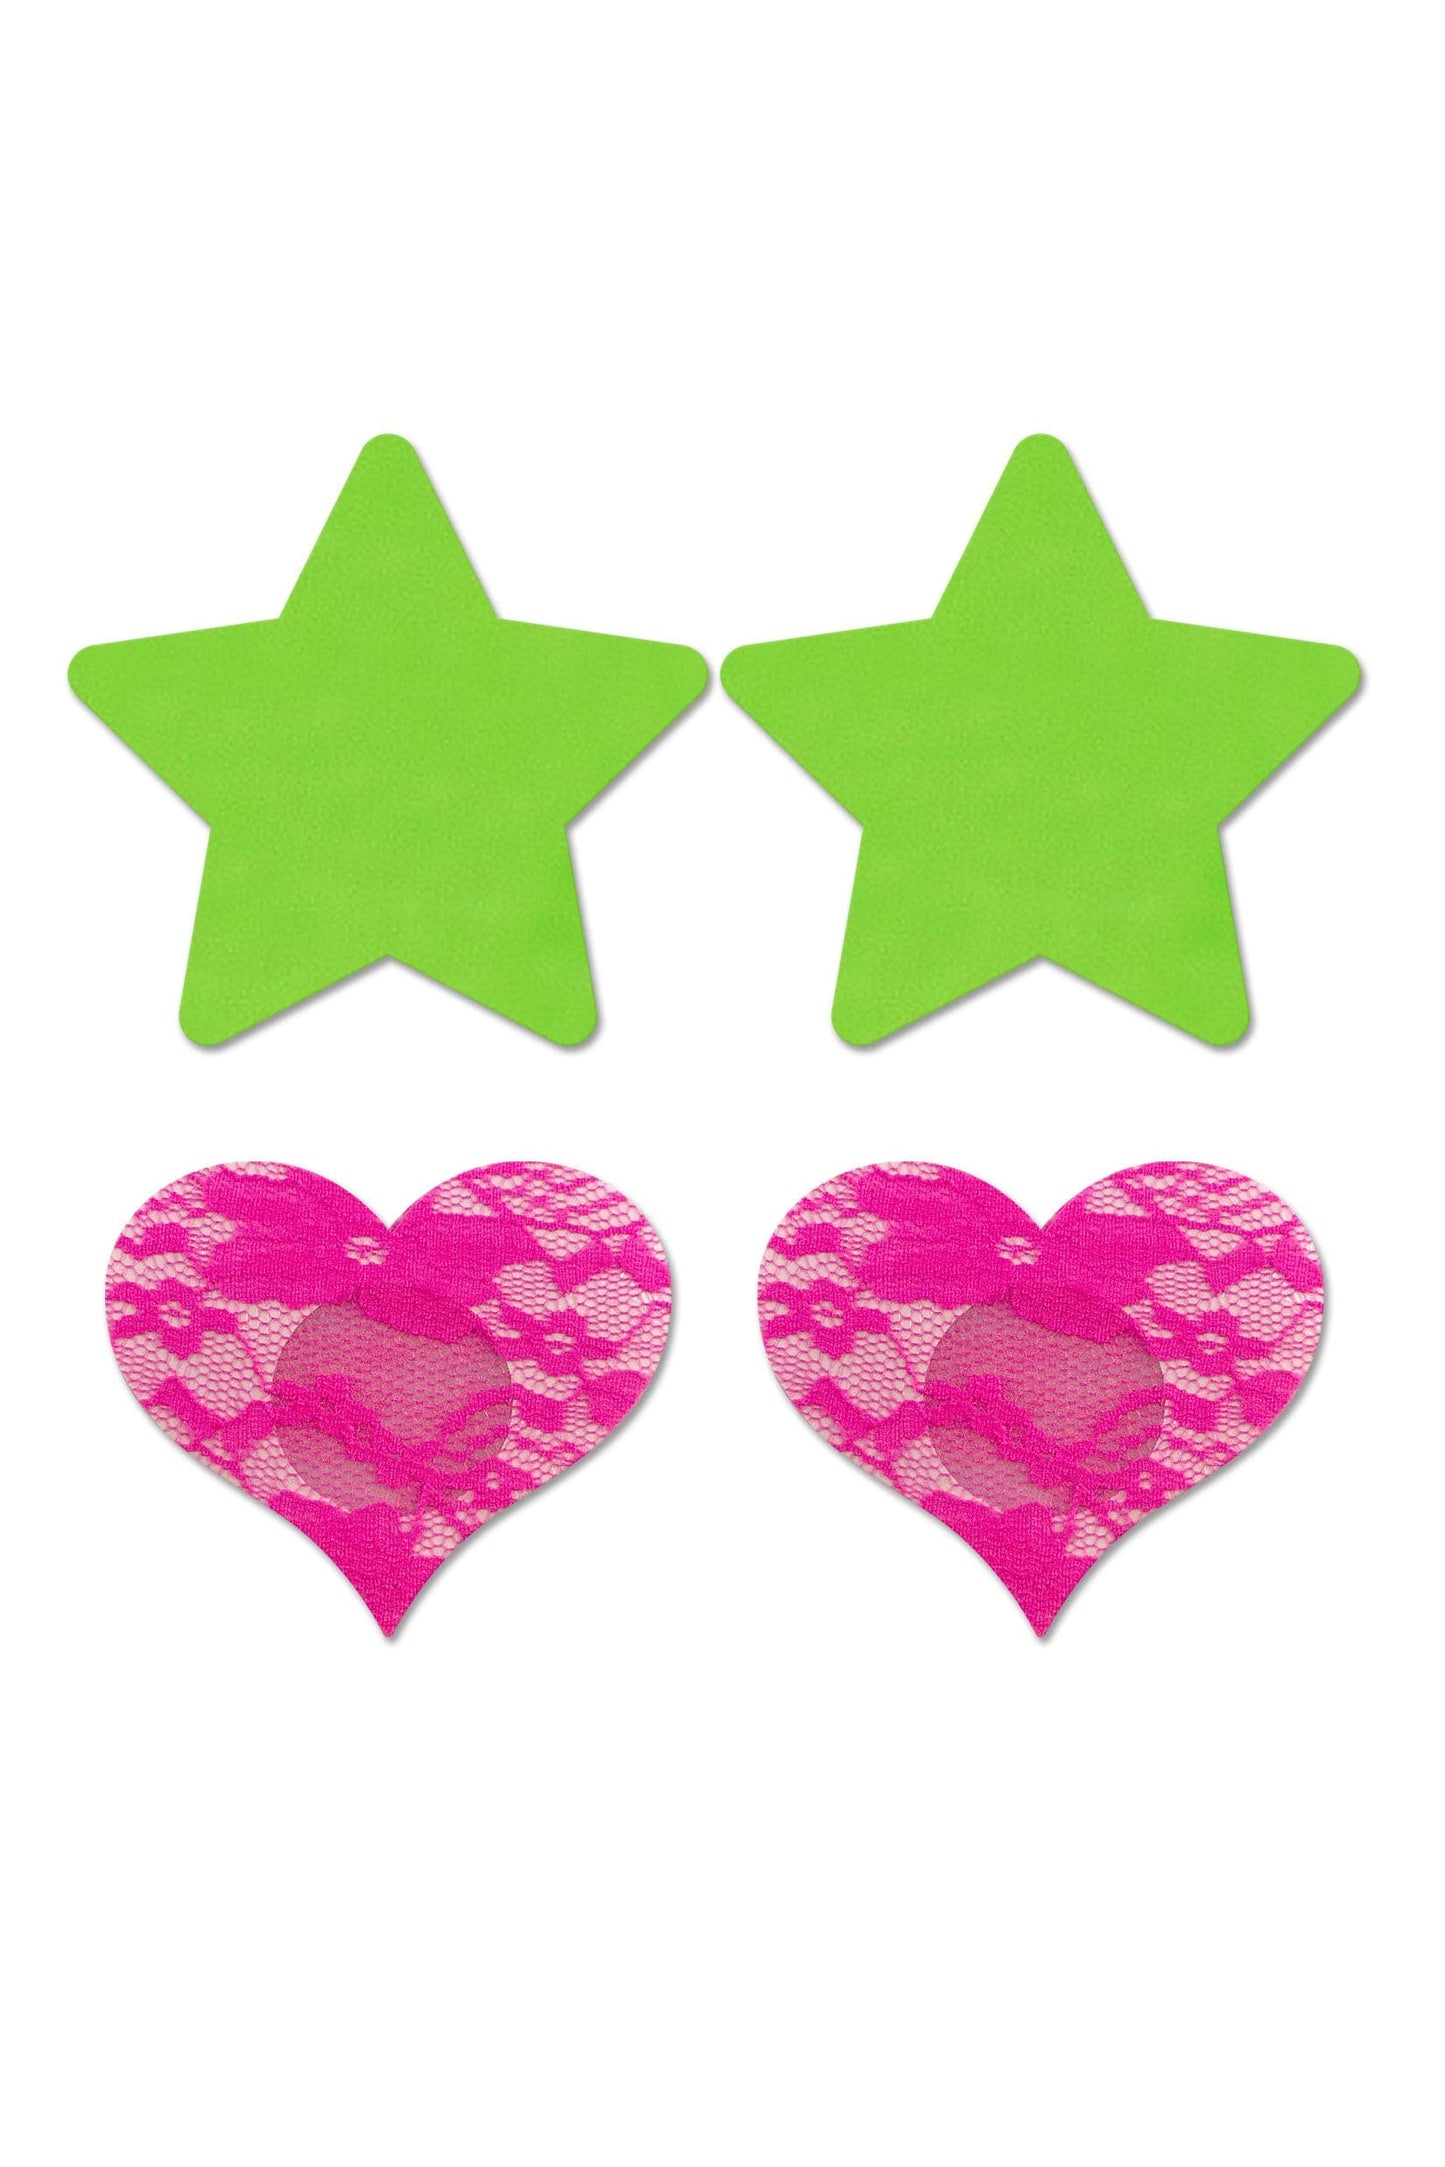 fashion pasties set neon green solid star and neon pink lace heart